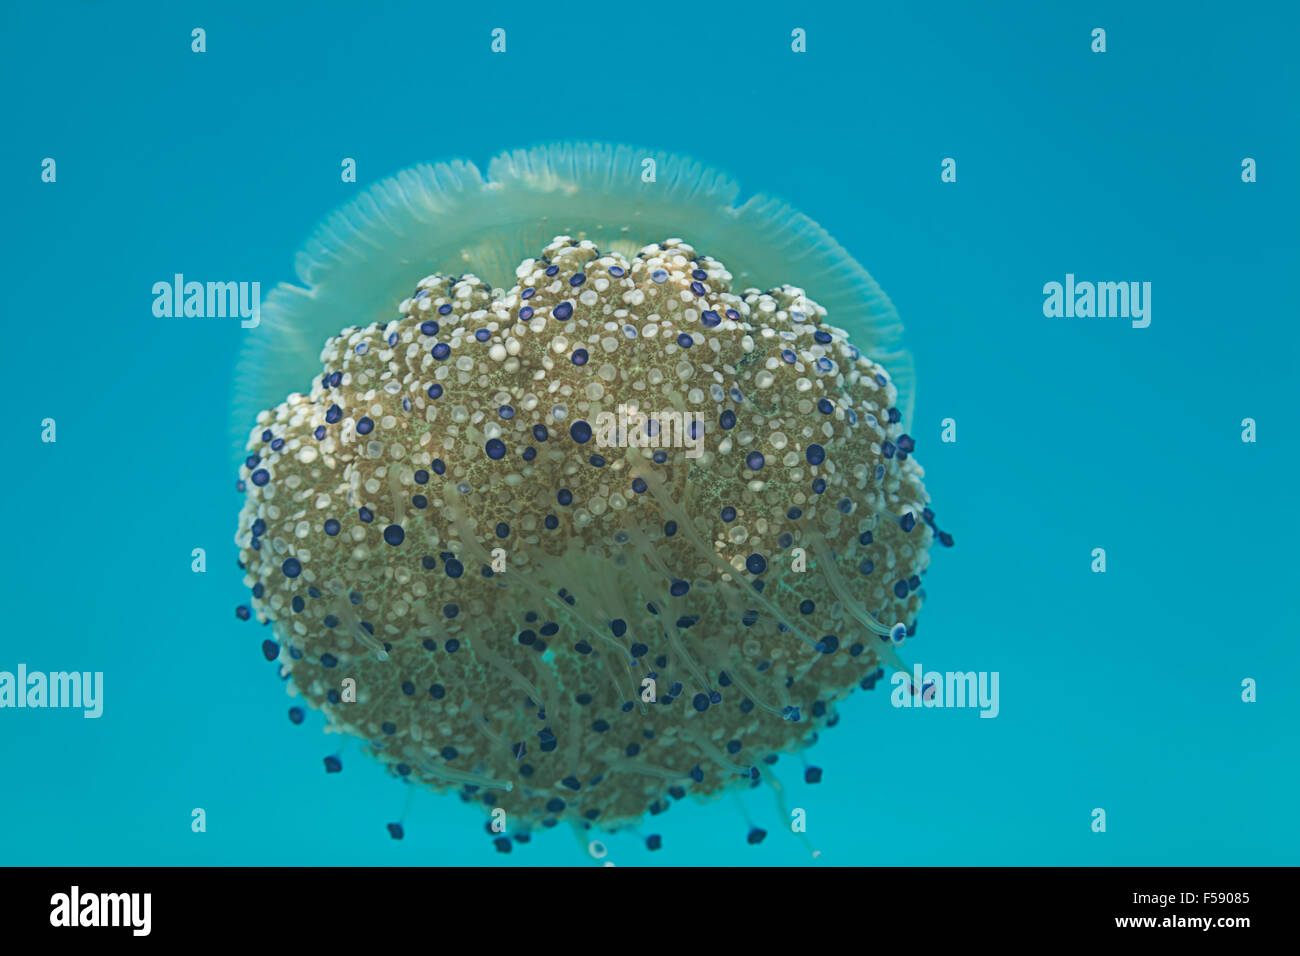 jellyfishes with blue light Stock Photo